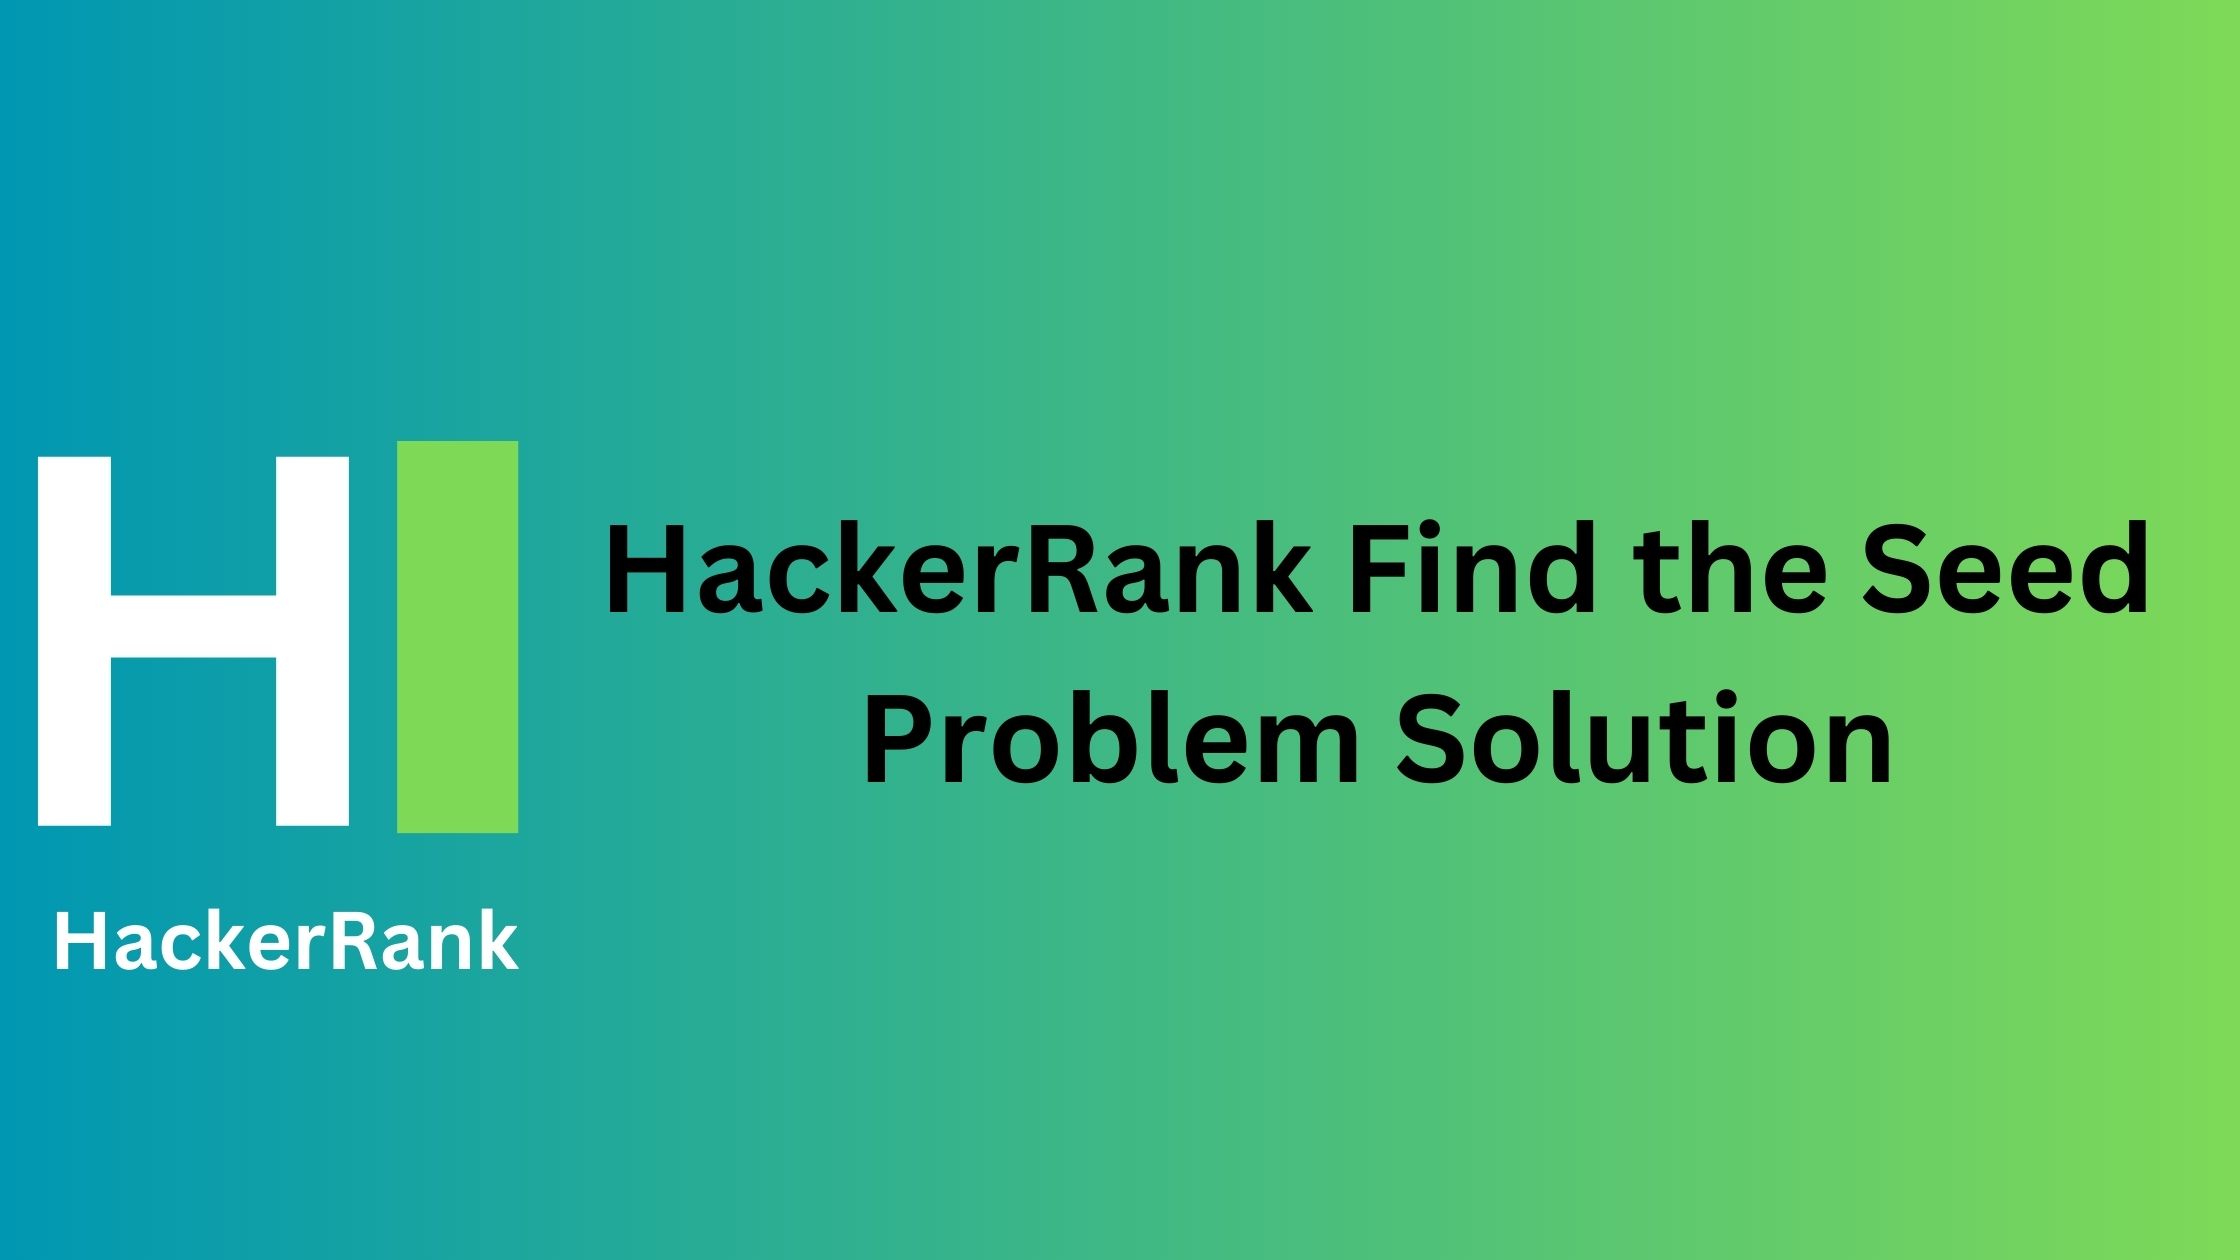 HackerRank Find the Seed Problem Solution